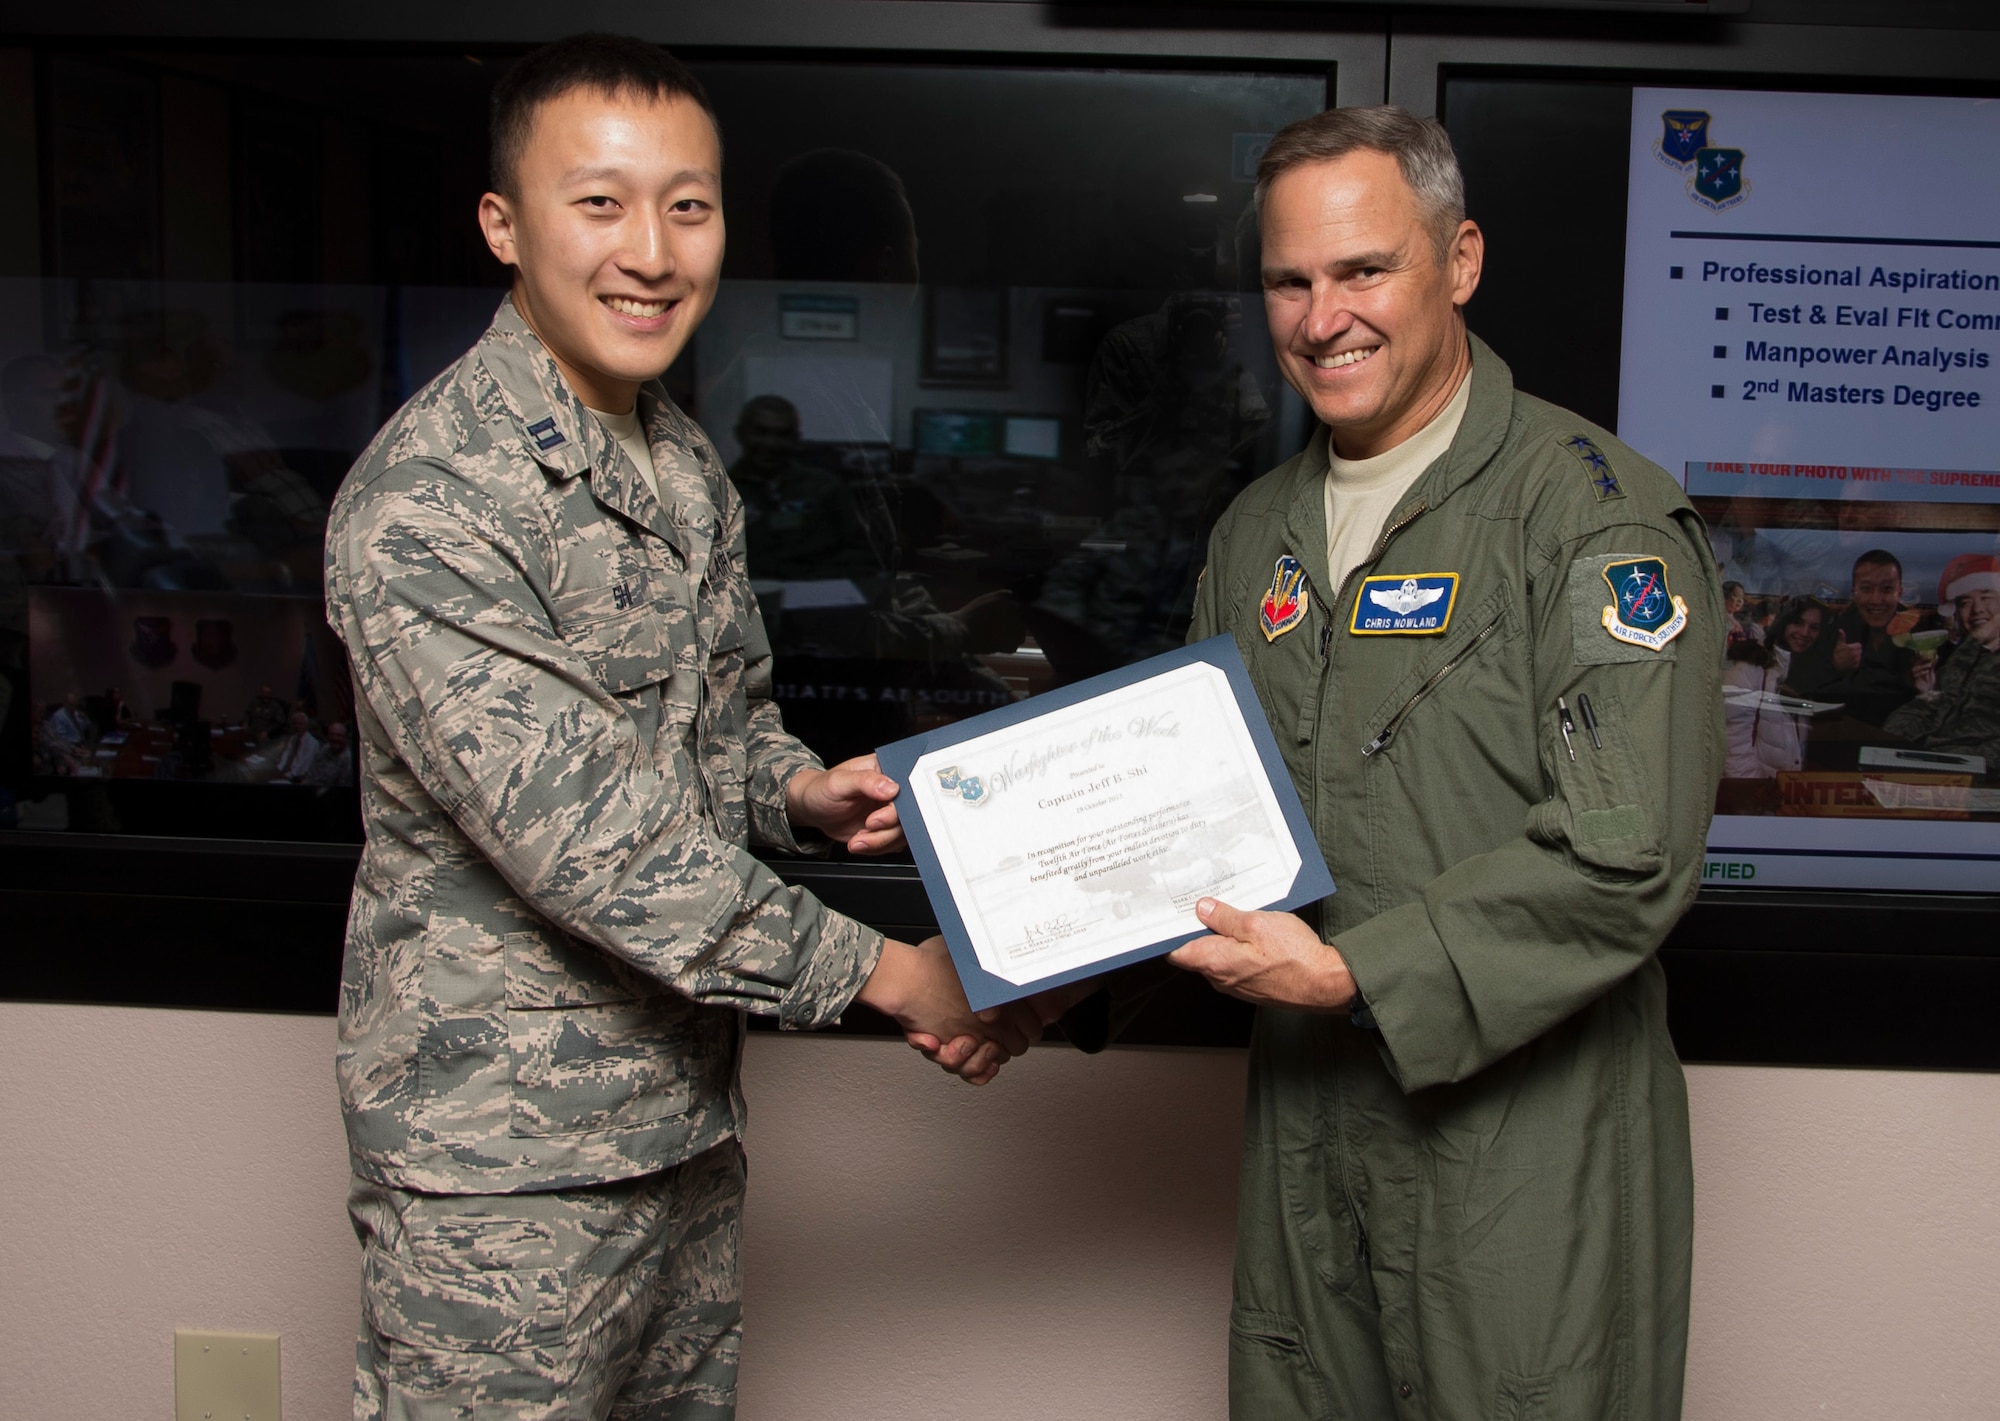 Capt. Jeff Shi, 12th Air Force (Air Forces Southern) operations research analyst, smiles after being presented the Warfighter of the Week from Lt. Gen. Chris Nowland, 12 AF (AFSOUTH) commander, during a staff meeting at Davis-Monthan AFB, Ariz., Oct. 19, 2015. War Fighter of the Week is an opportunity for the Airmen who represent 12th Air Force (Air Forces Southern) to share their own story. The Warfighter of the Week initiative aligns with the 12th Air Force (Air Forces Southern) commander’s priority of creating a work environment where someone knows you both professionally and personally. (U.S. Air Force photo by Staff Sgt. Adam Grant/Released)